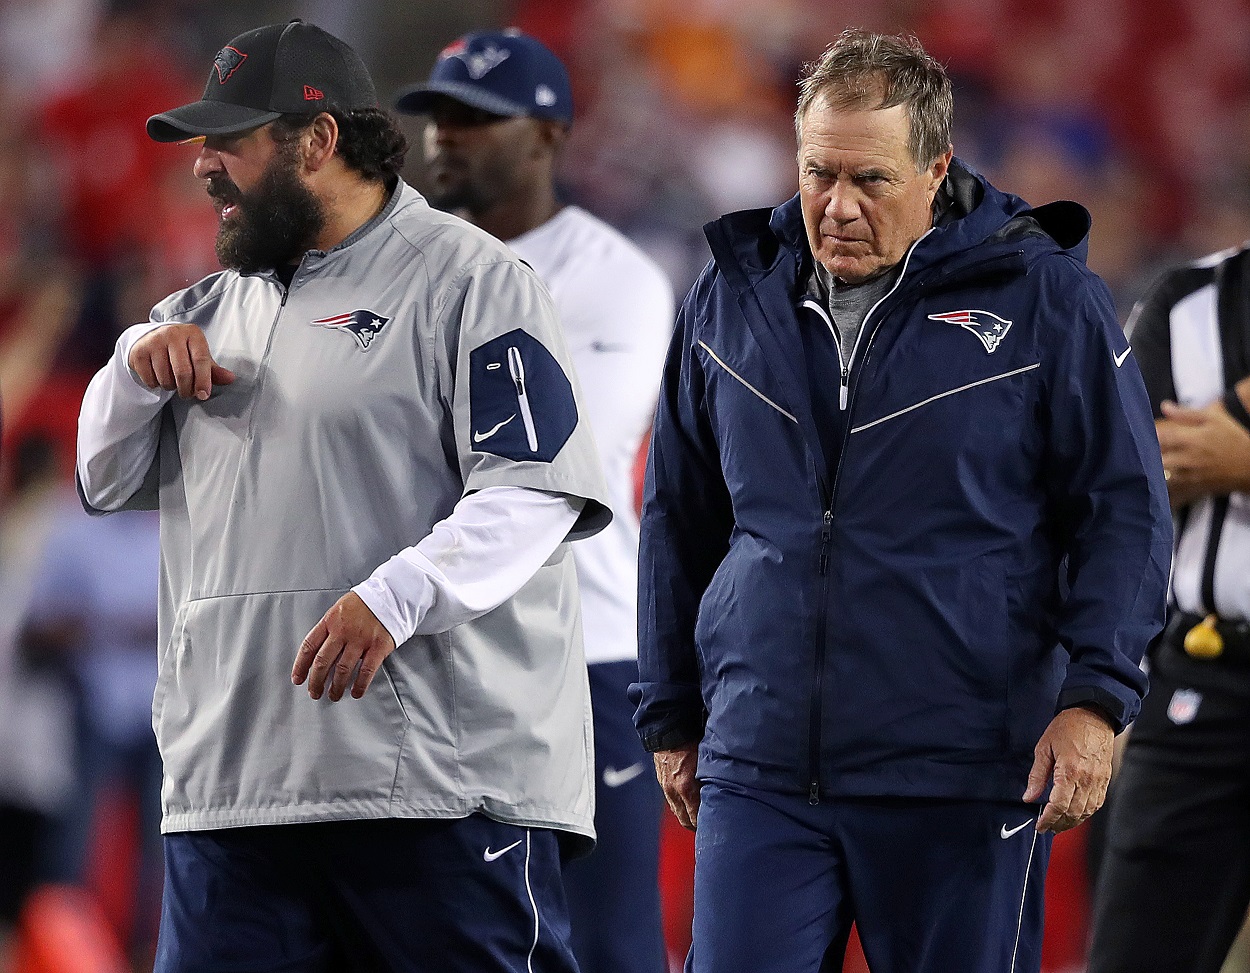 Bill Belichick and Matt Patricia during a New England Patriots-Tampa Bay Buccaneers matchup in October 2017